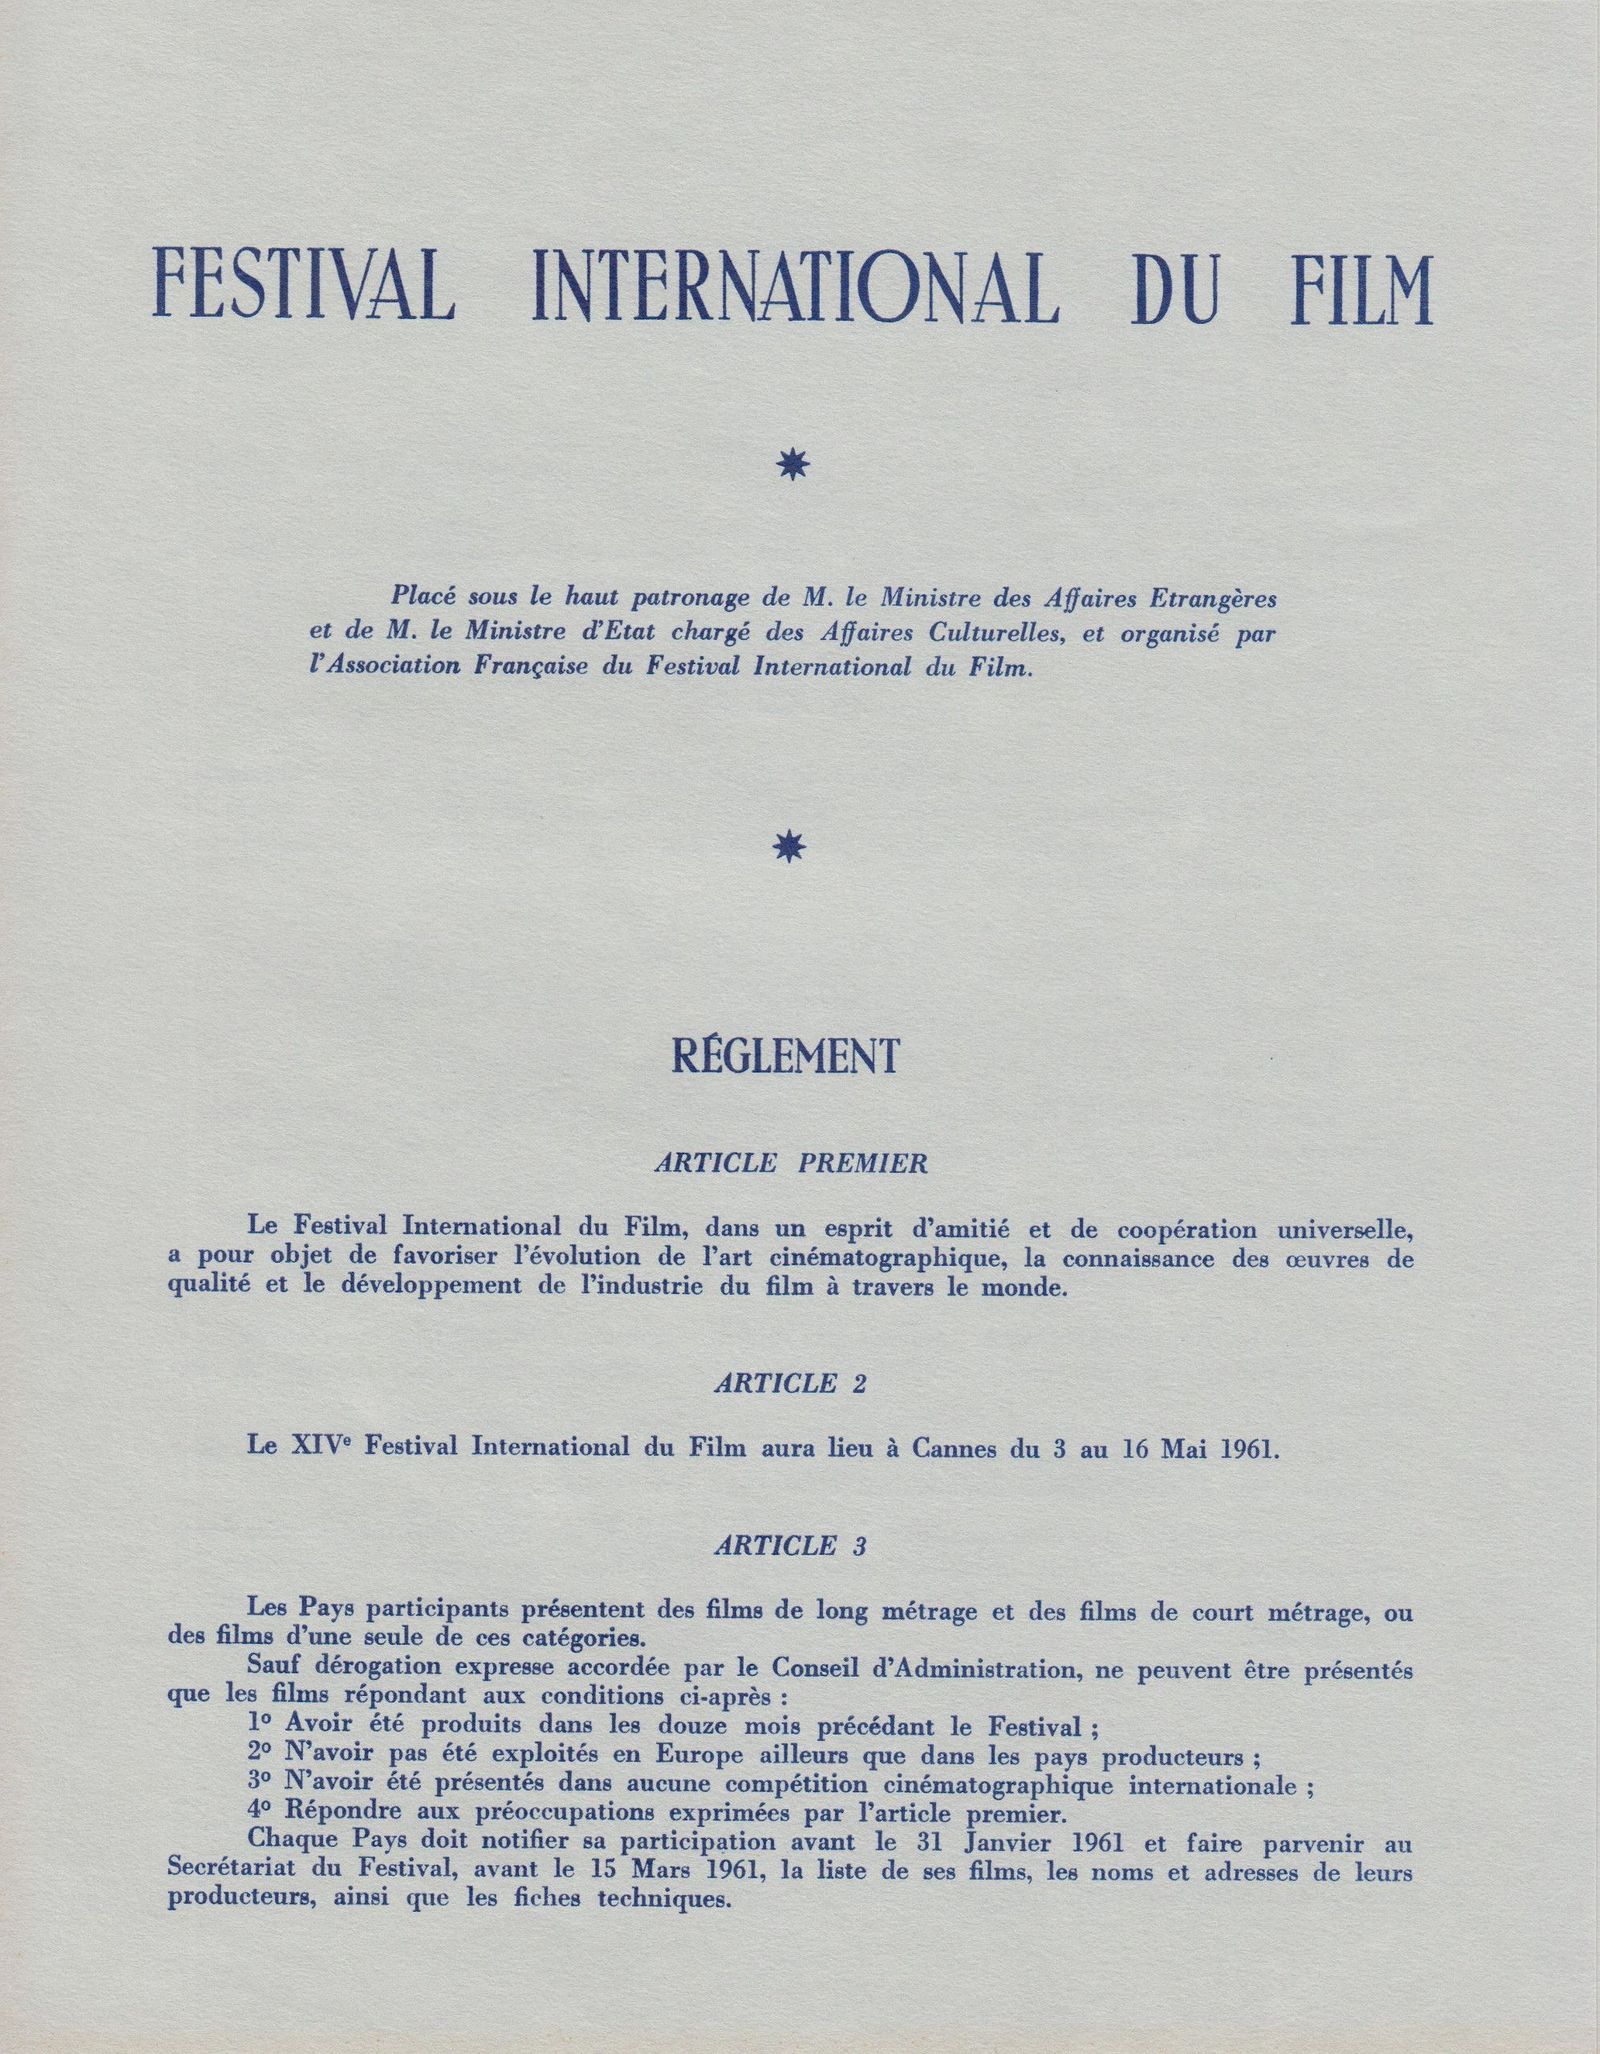 1961 Rules and regulations - Festival de Cannes